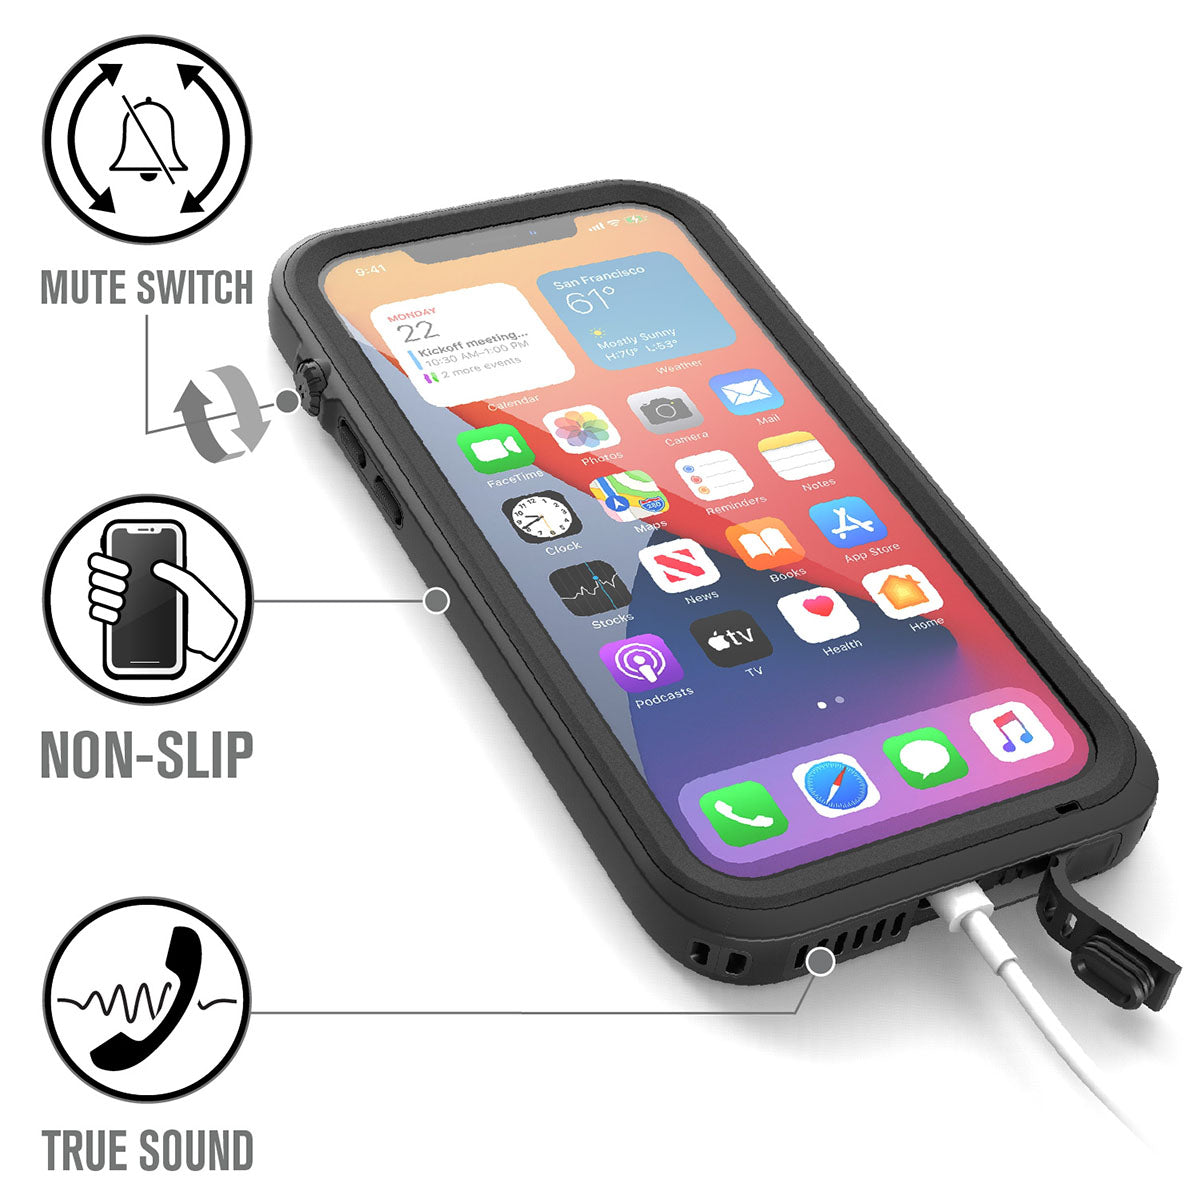 Catalyst iPhone 12 waterproof case total protection showing features of the case Text reads mute switch non-slip true sound.